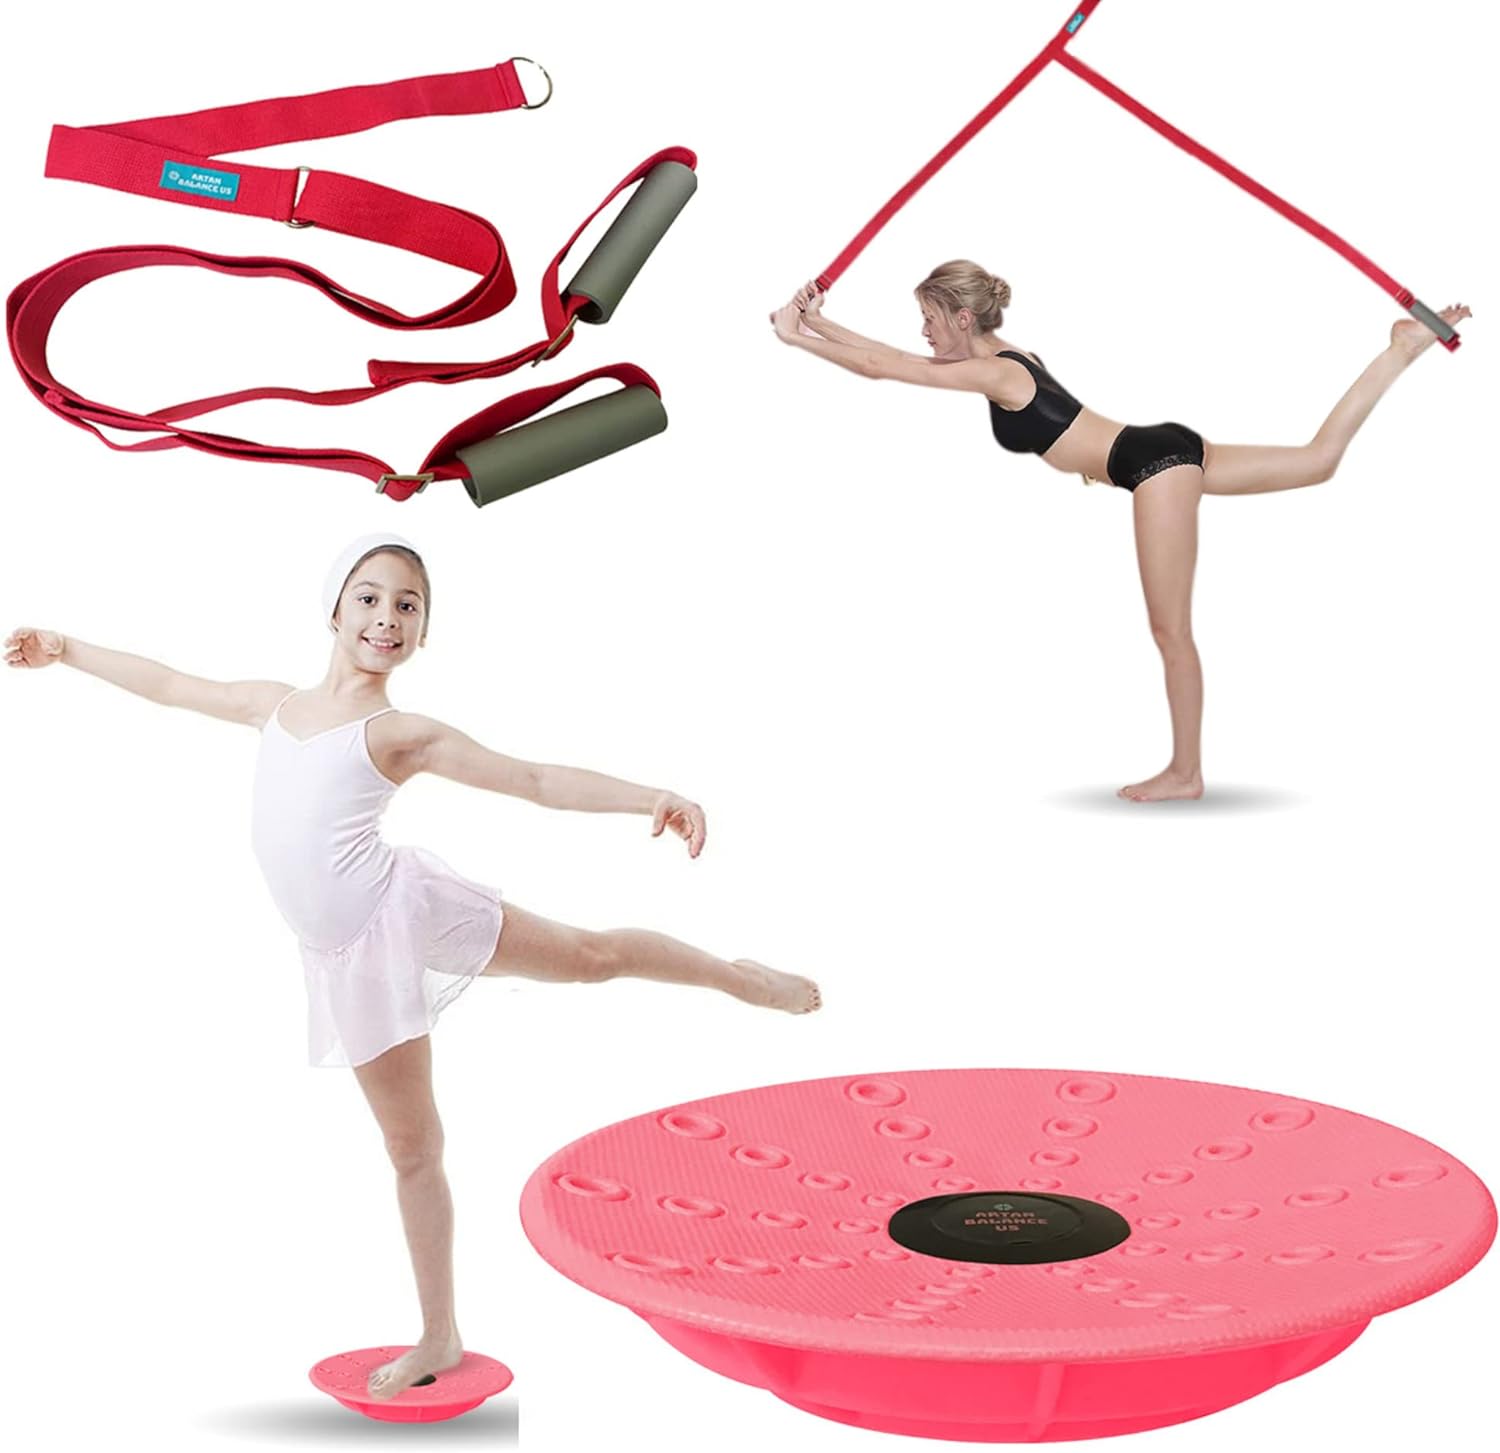 Artan Balance Leg Stretching Strap and Ballet Balance Board, 2 Pc. Set, Stretching, Disc Core Trainer and Flexibility Equipment for Dance, Gymnastics